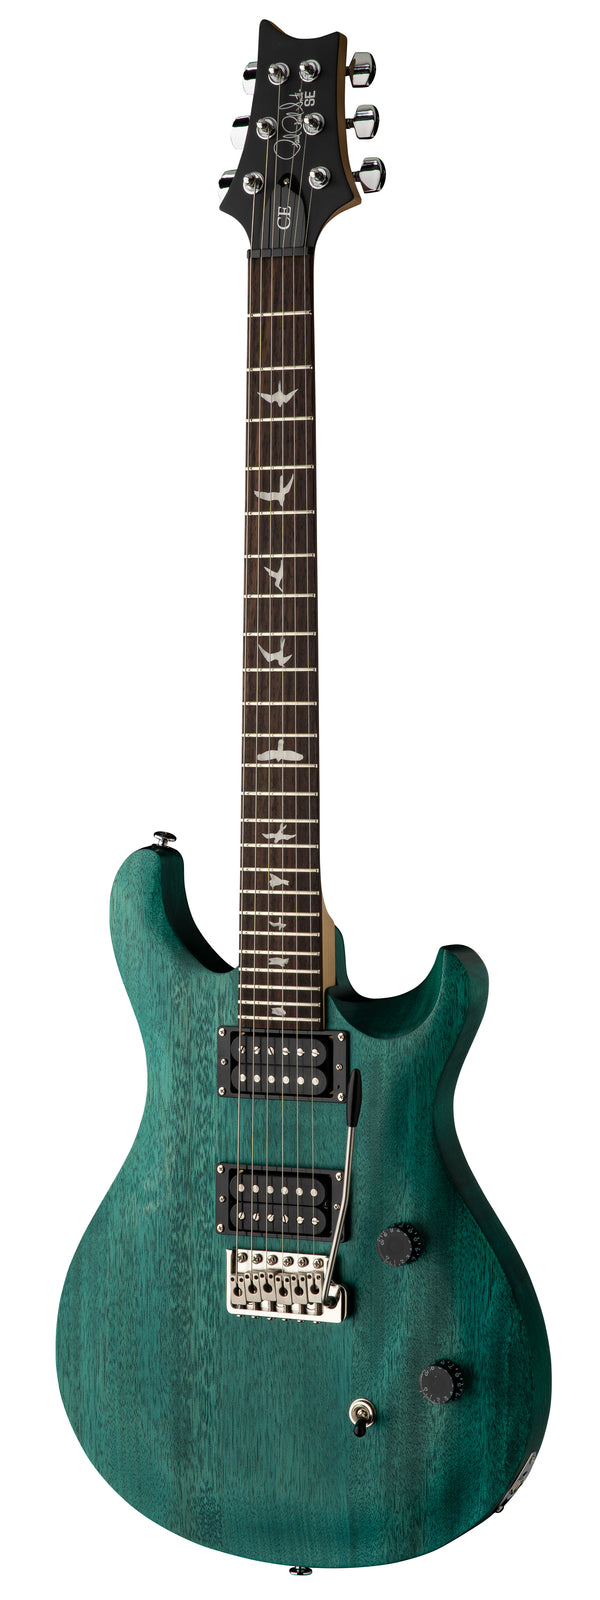 Paul Reed Smith SE CE 24 Standard Satin Turquoise Pre-Order